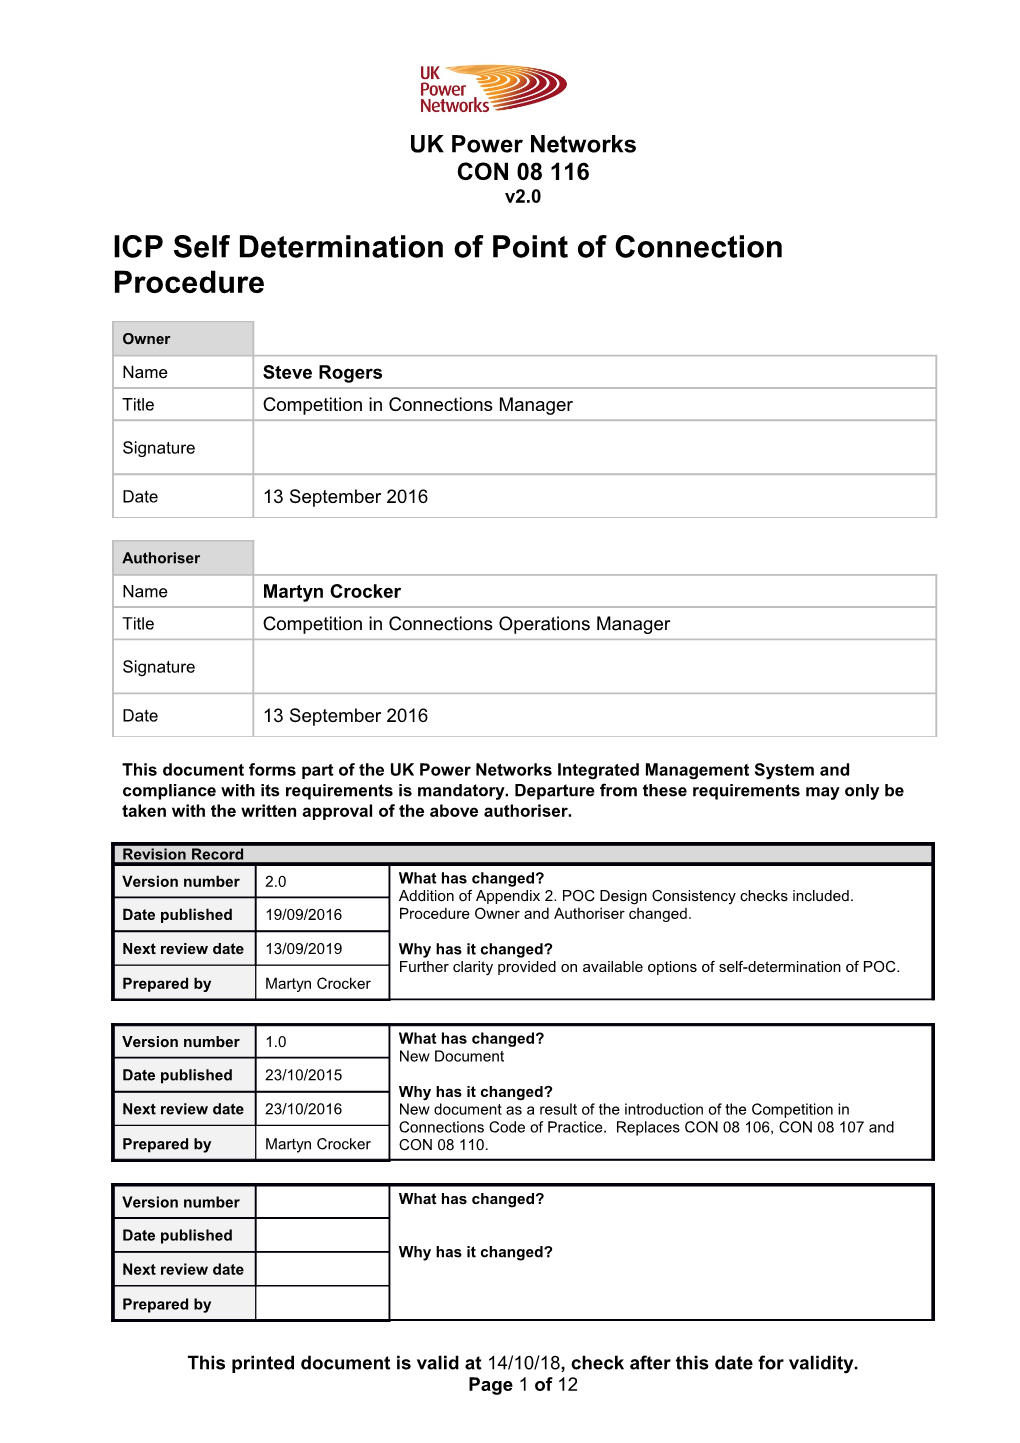 CON 08 116 ICP Self Determination of Point of Connection Procedure